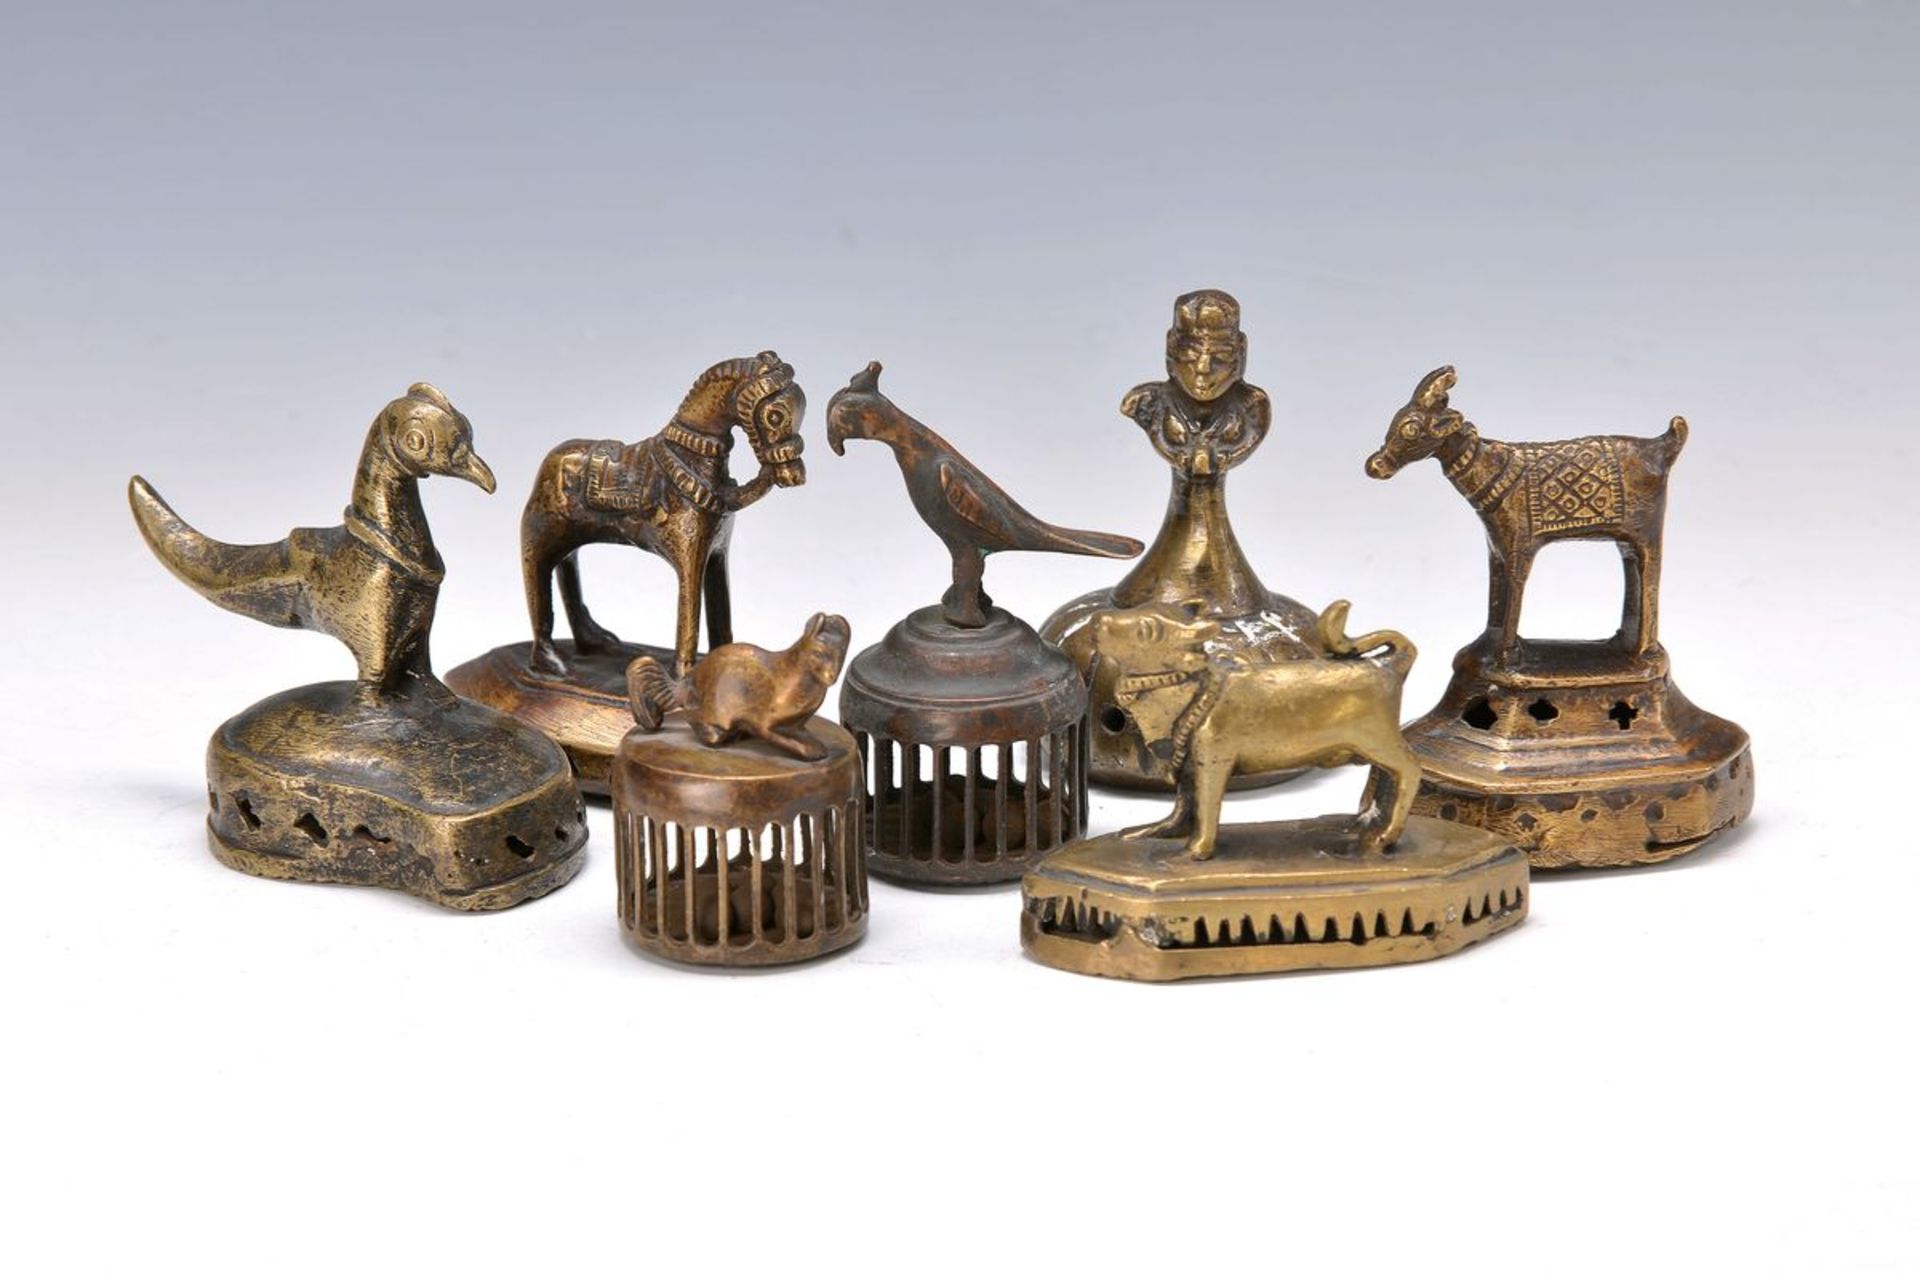 7 sound-small bells, South India, around 1900,brass, with different fully plastic animals ashandles,